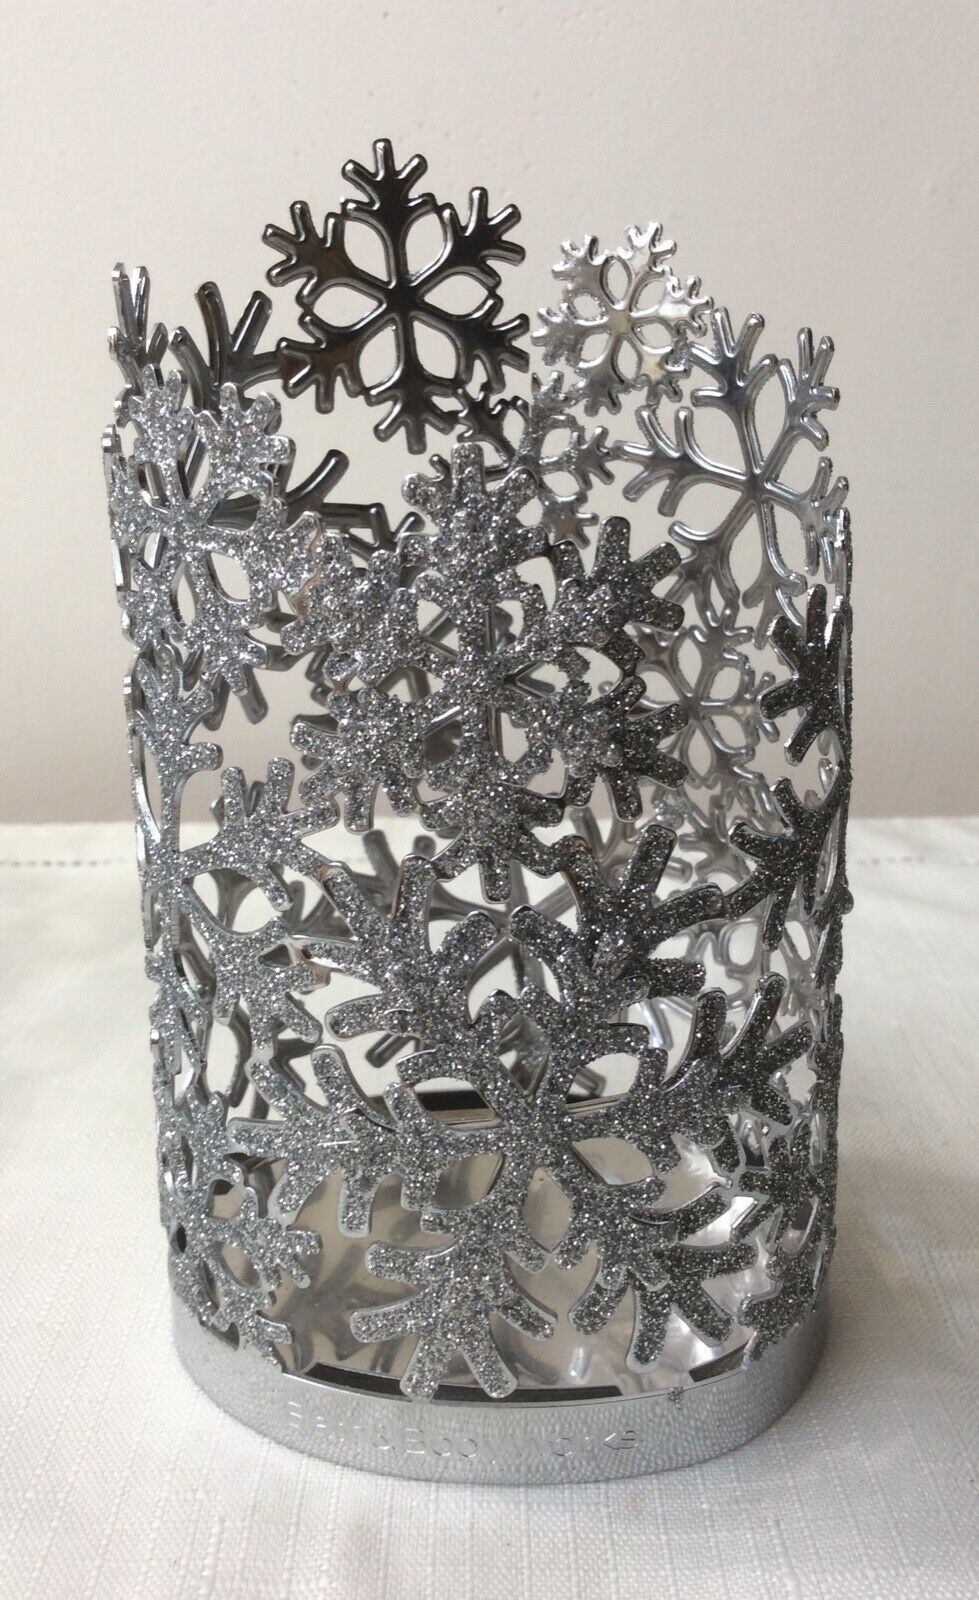 NEW BATH & BODY WORKS WHITE SNOWFLAKES GEMS LARGE 3-WICK CANDLE HOLDER SLEEVE 